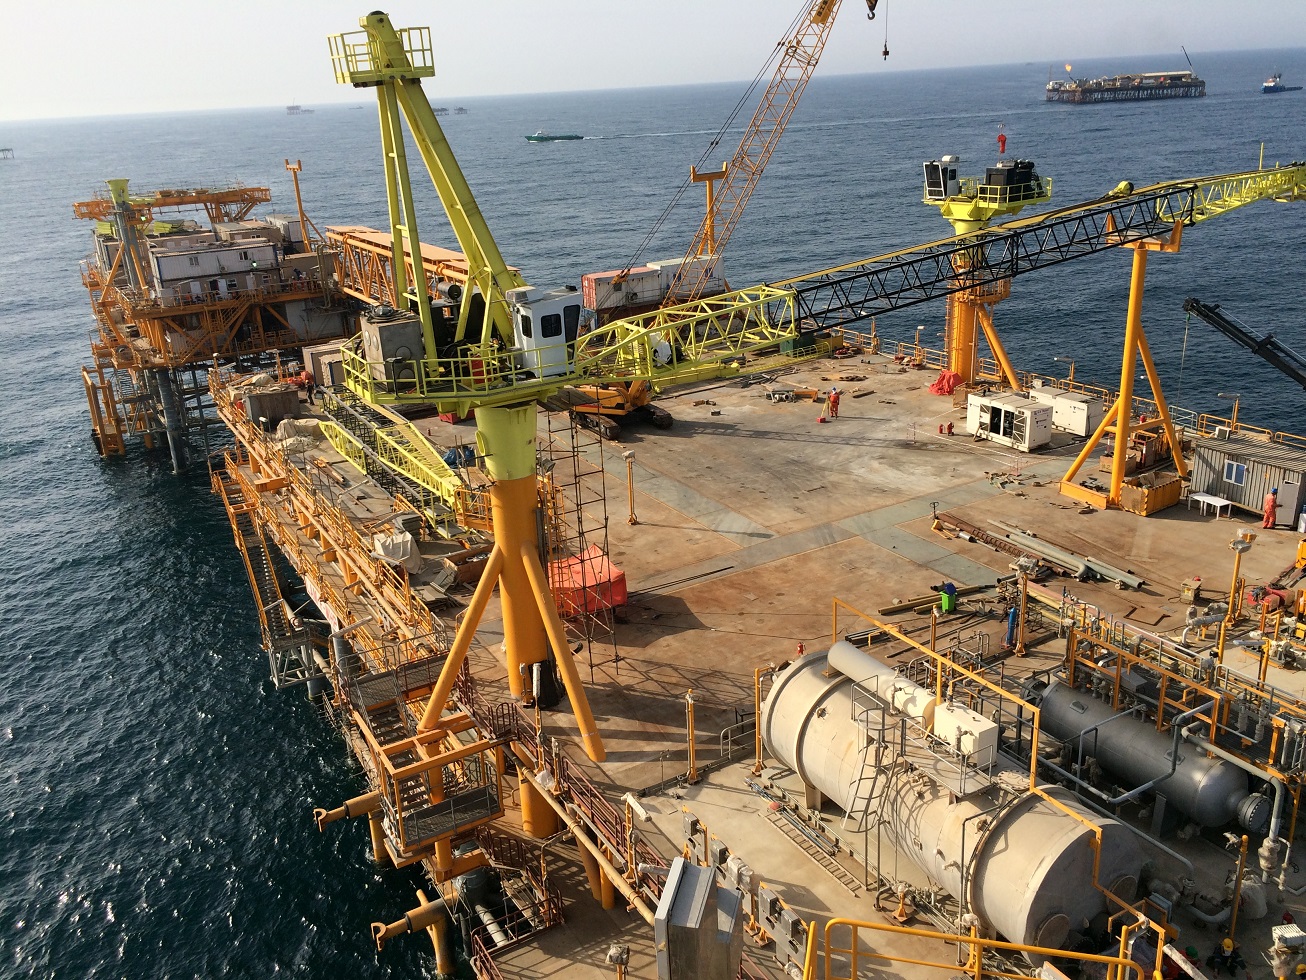 Engineering, Procurement, Fabrication, Integration, Load Out, Piling, Offshore Installation and Commissioning of Drilling platform, living quarter, helidecks, subsea and dubsea pipelines.